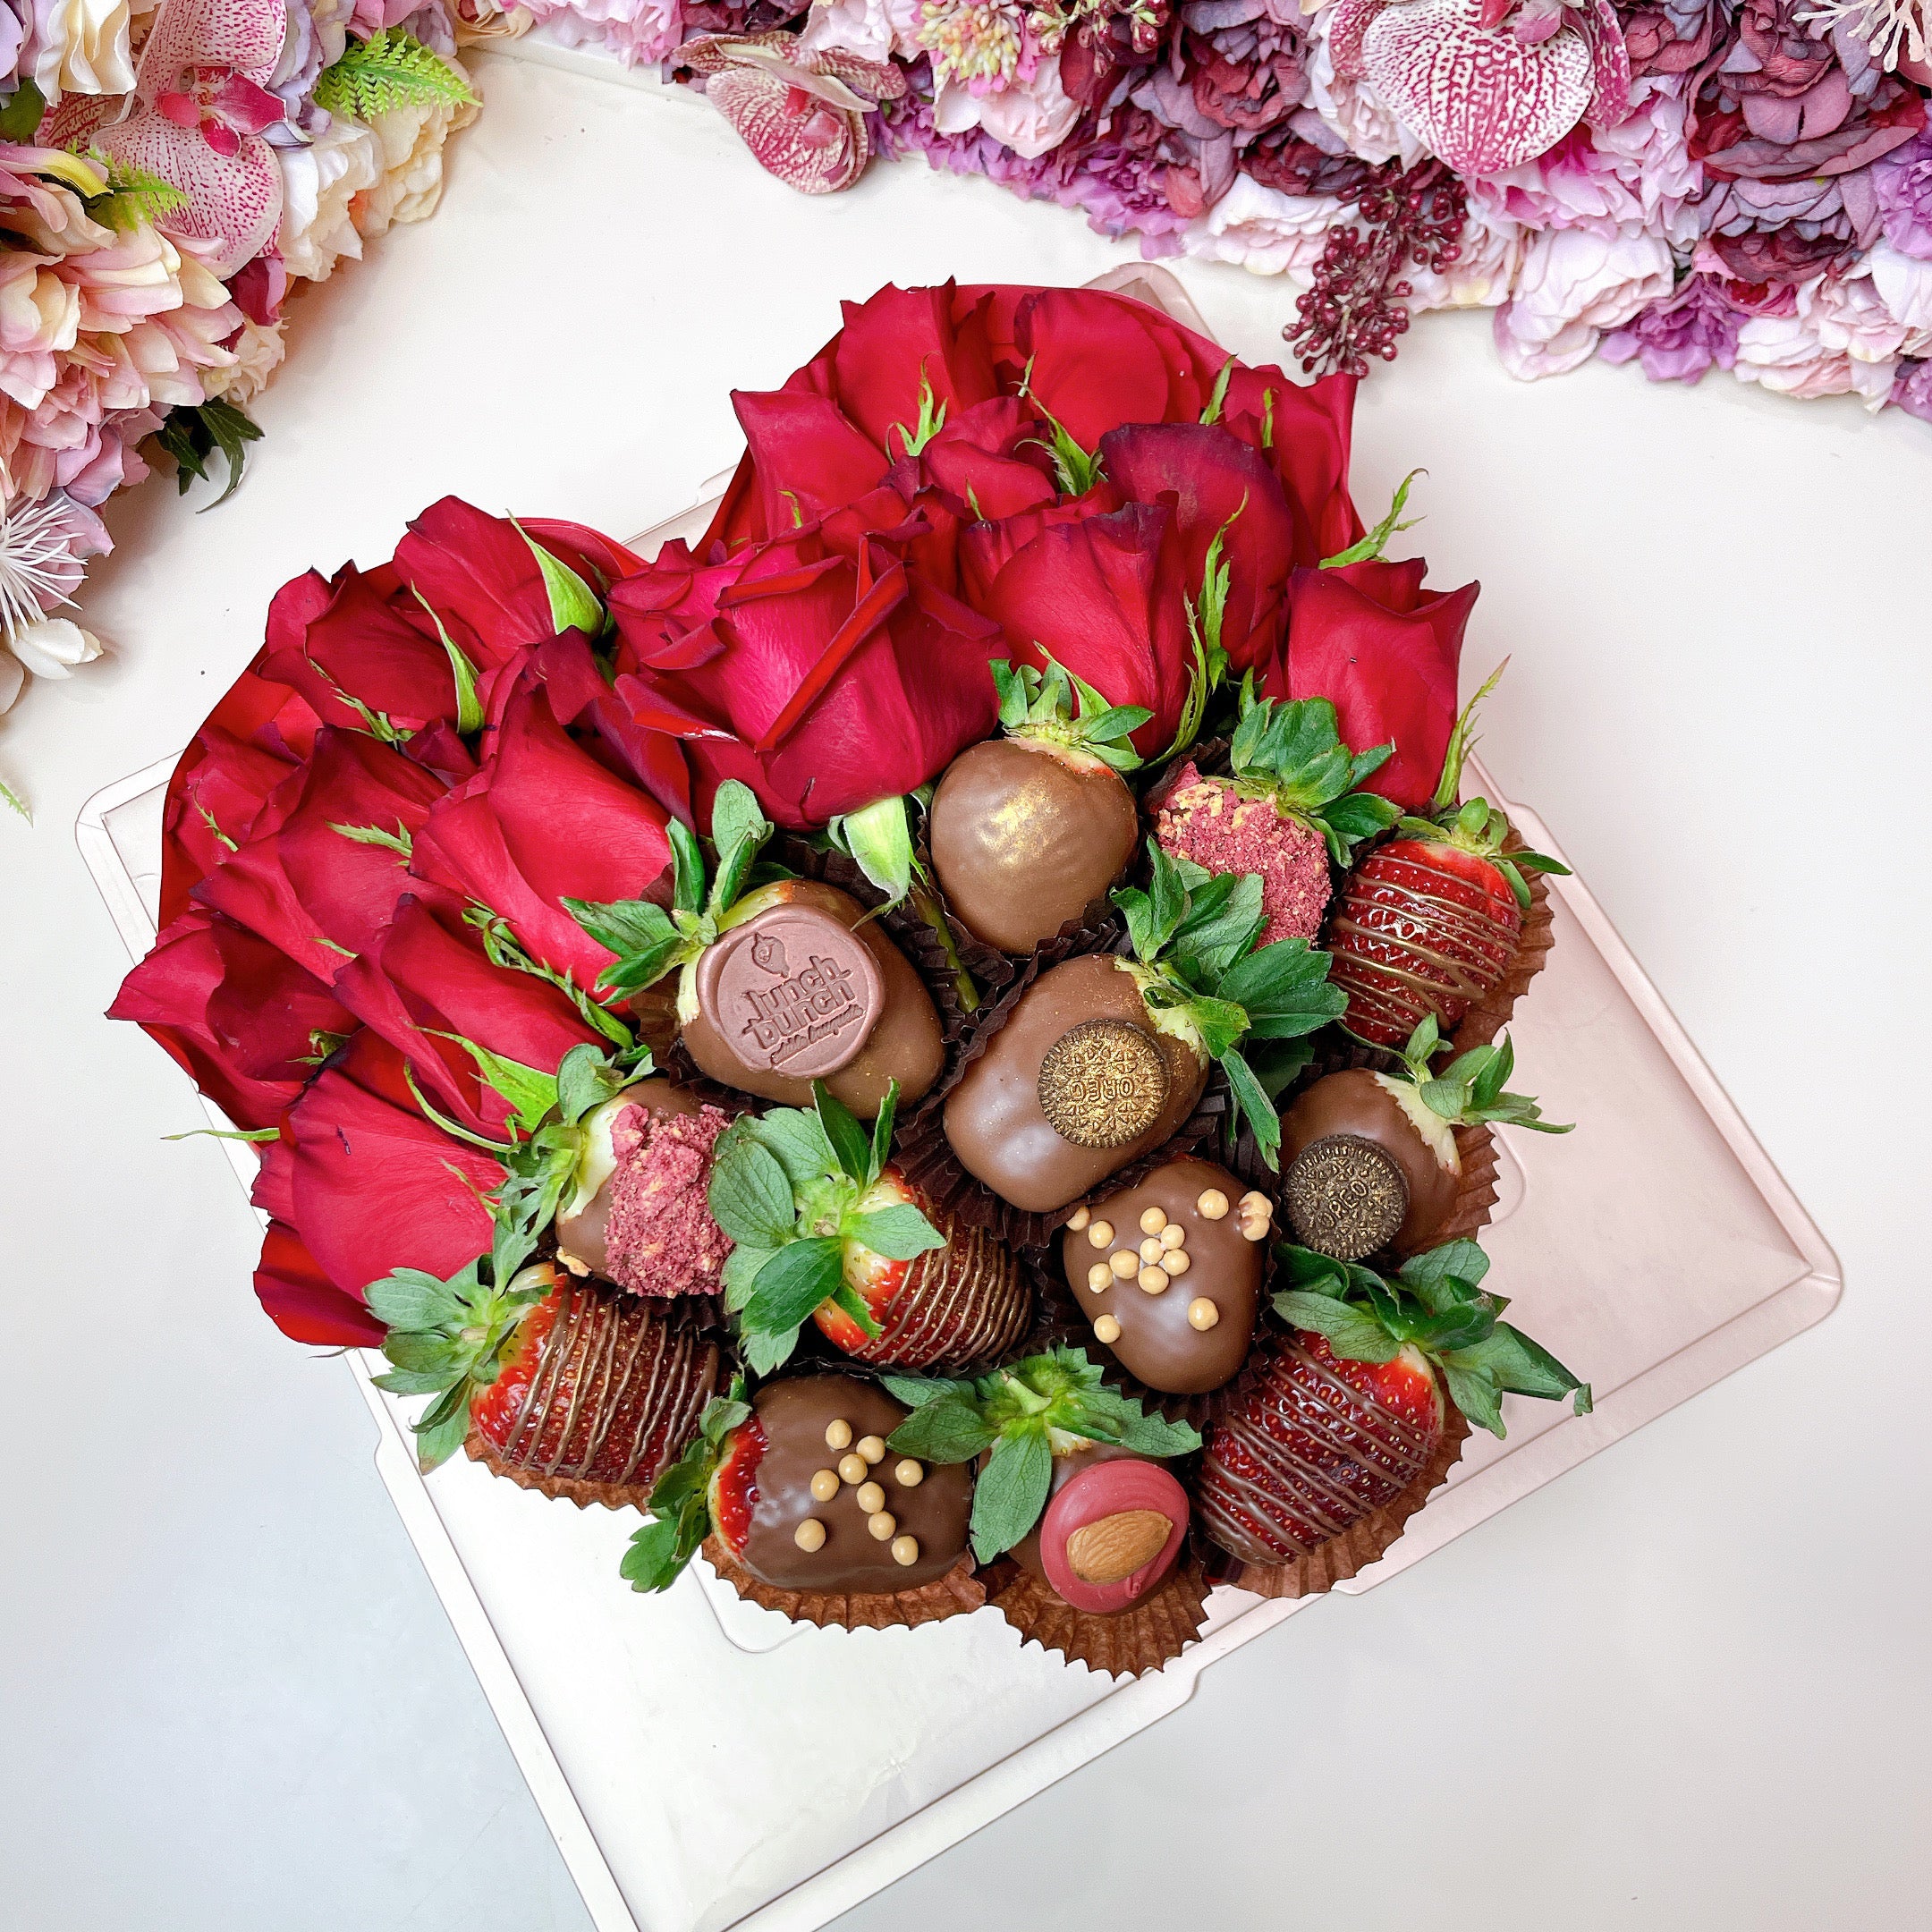 Chocolate strawberries and roses Love Heart Gift Box, roses and strawberries hamper, gift same day delivery chocolate box adelaide